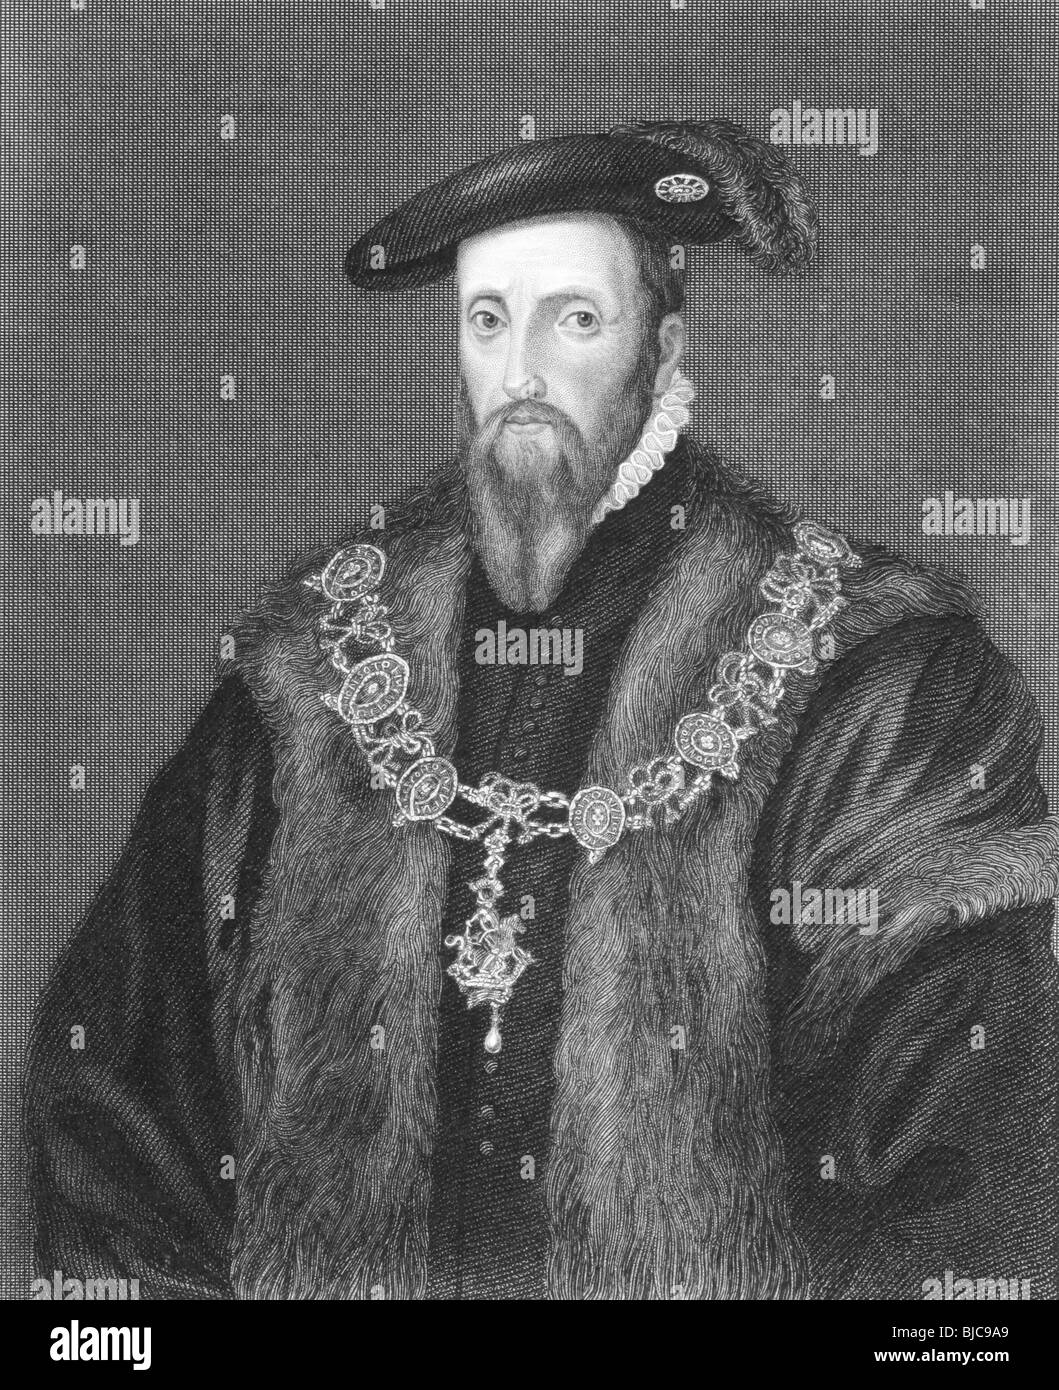 Edward Seymour, 1st Duke of Somerset (1506-1552) on engraving from the 1800s. Stock Photo